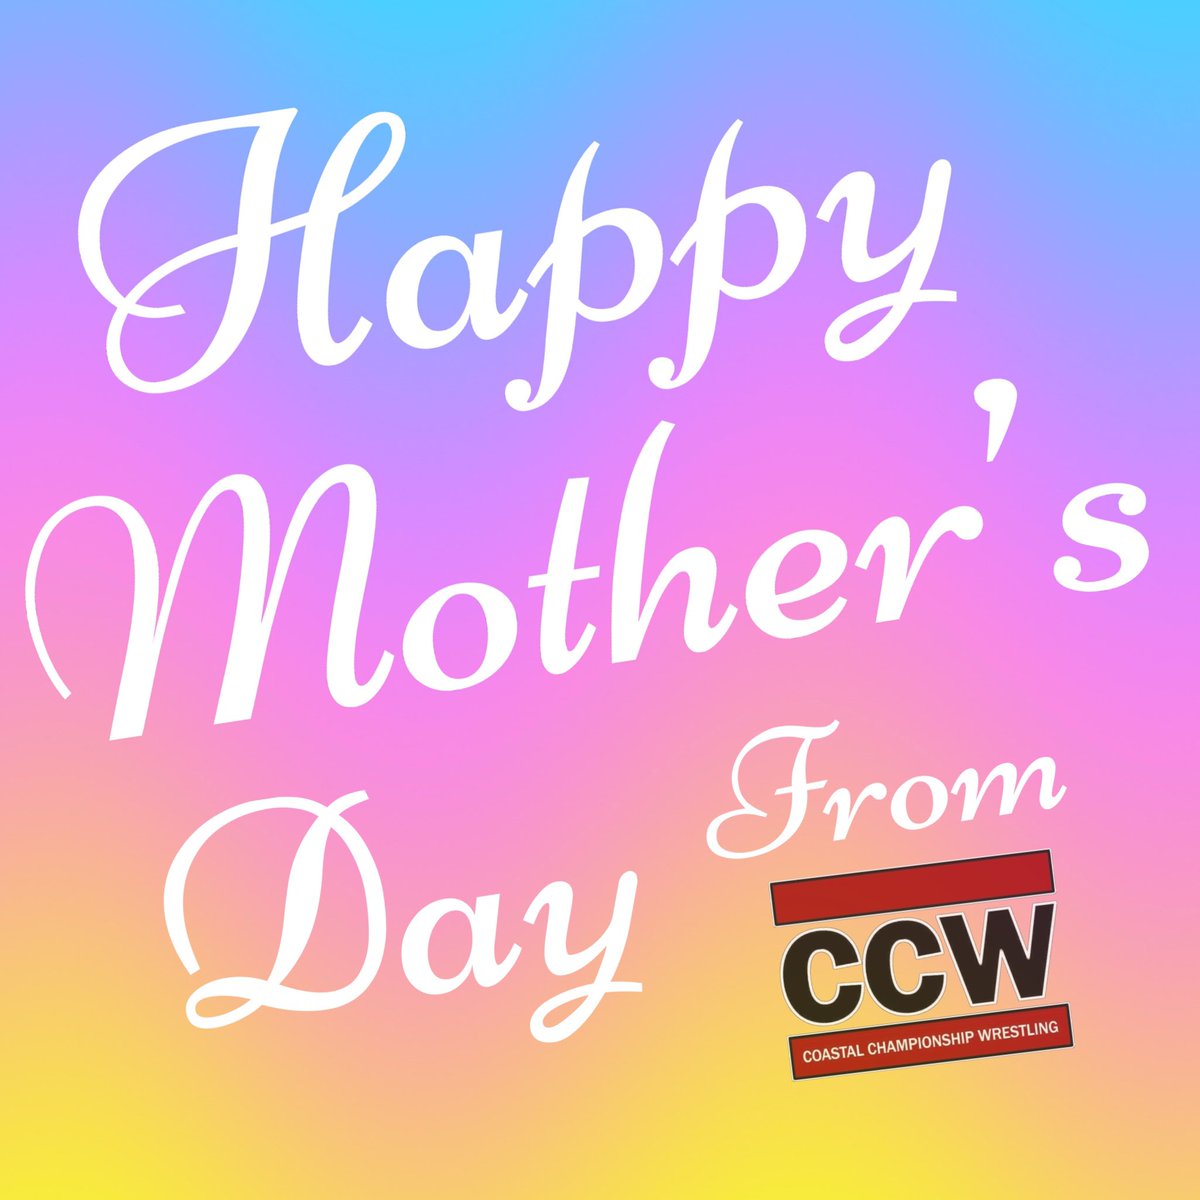 We are grateful for all the Mom’s out there. Happy #MothersDay from Coastal Championship Wrestling! ❤️